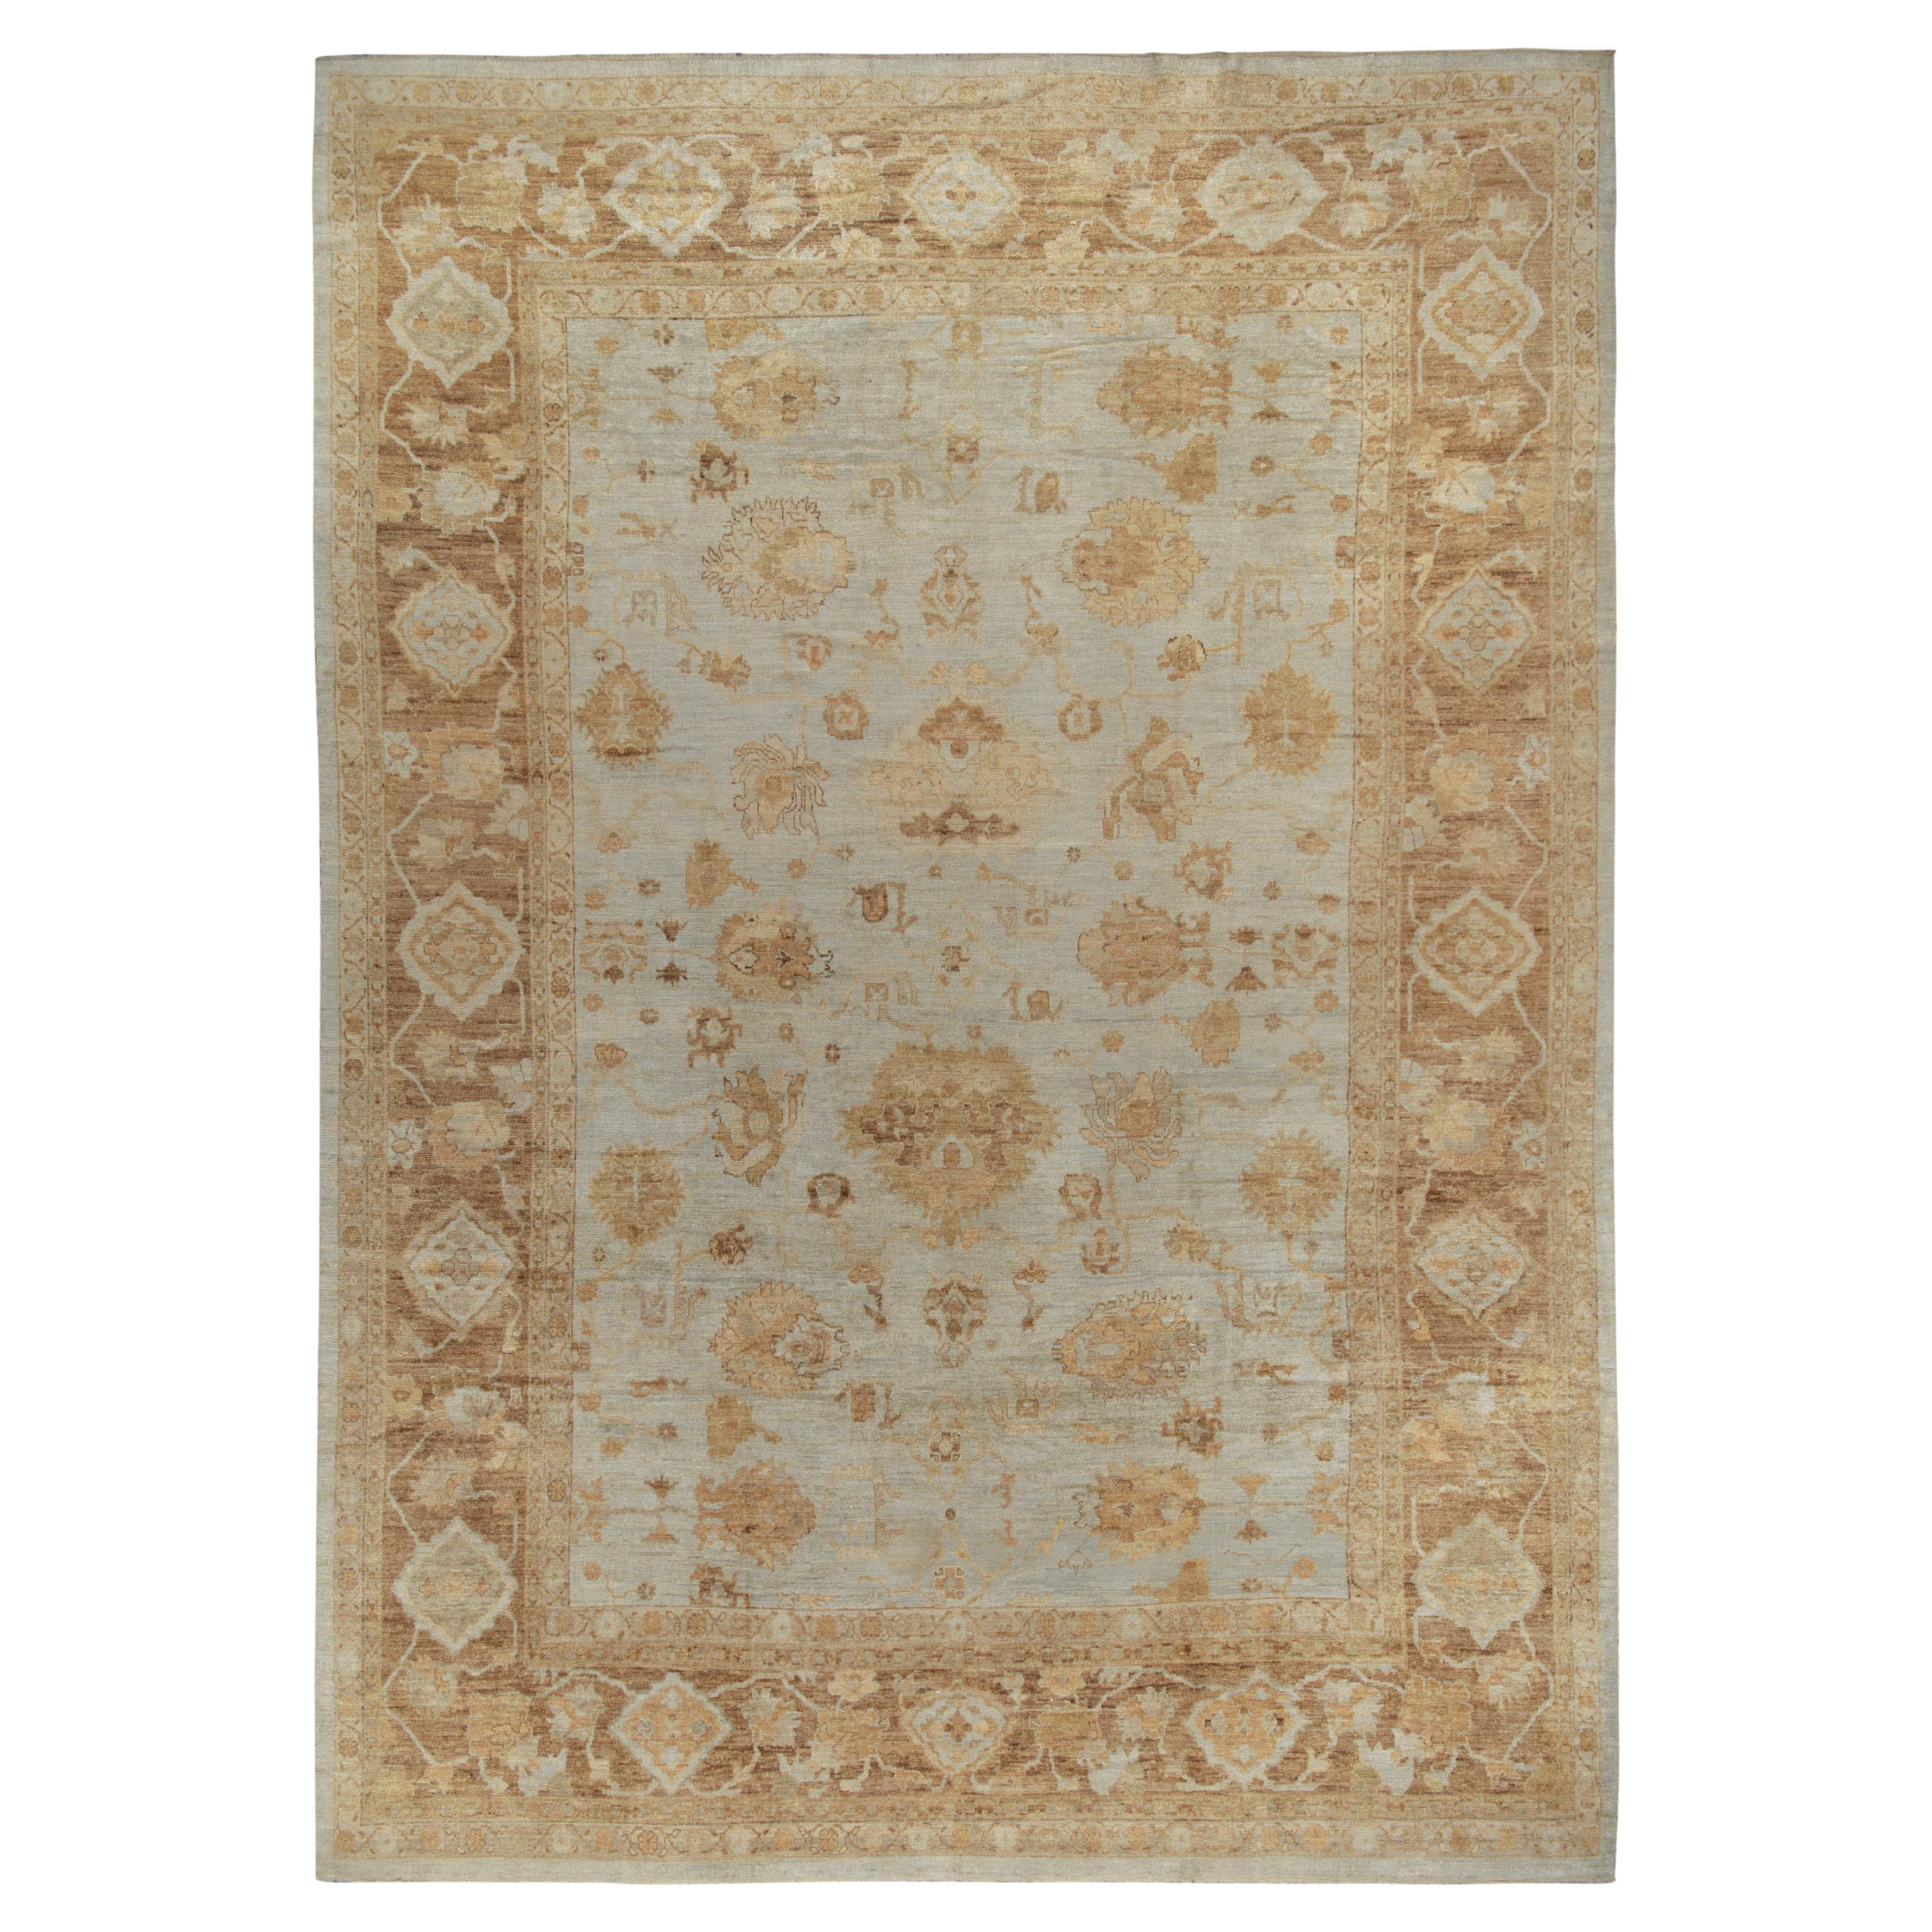 Rug & Kilim's Contemporary Oushak Rug in All over Blue, Beige Floral Pattern For Sale